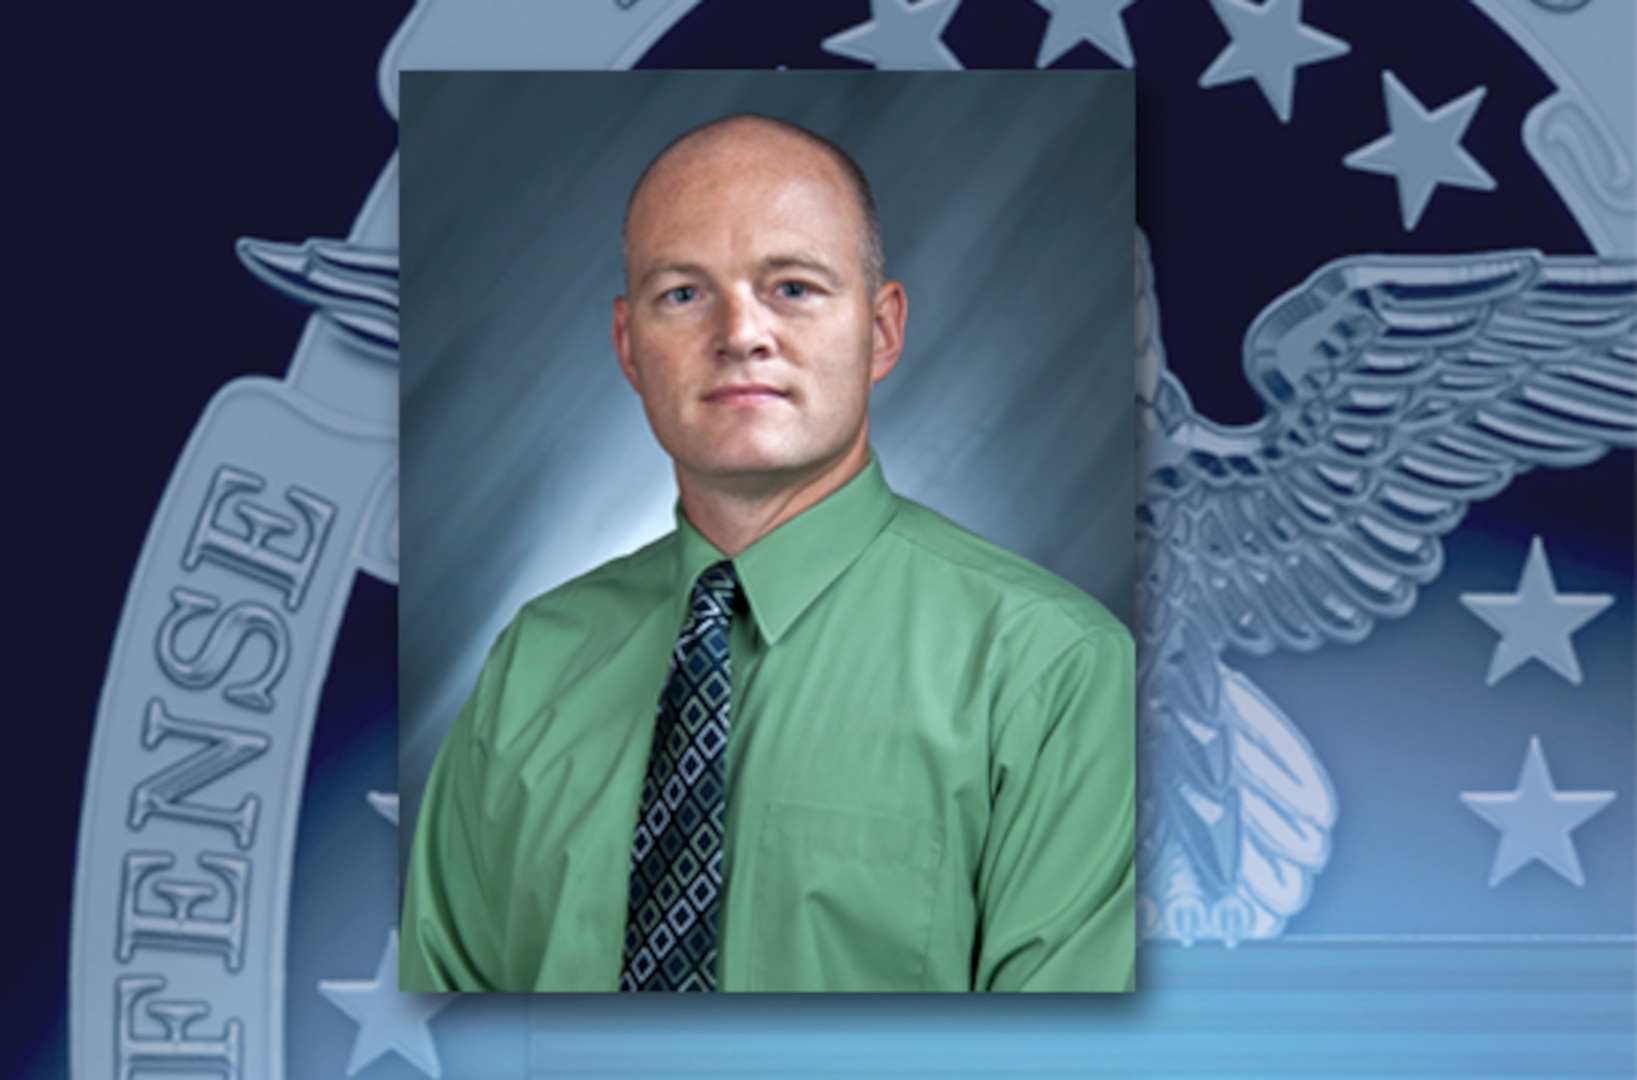 Stephen Byus, the first DLA employee killed in Afghanistan, is being inducted into the DLA Hall of Fame July 14.